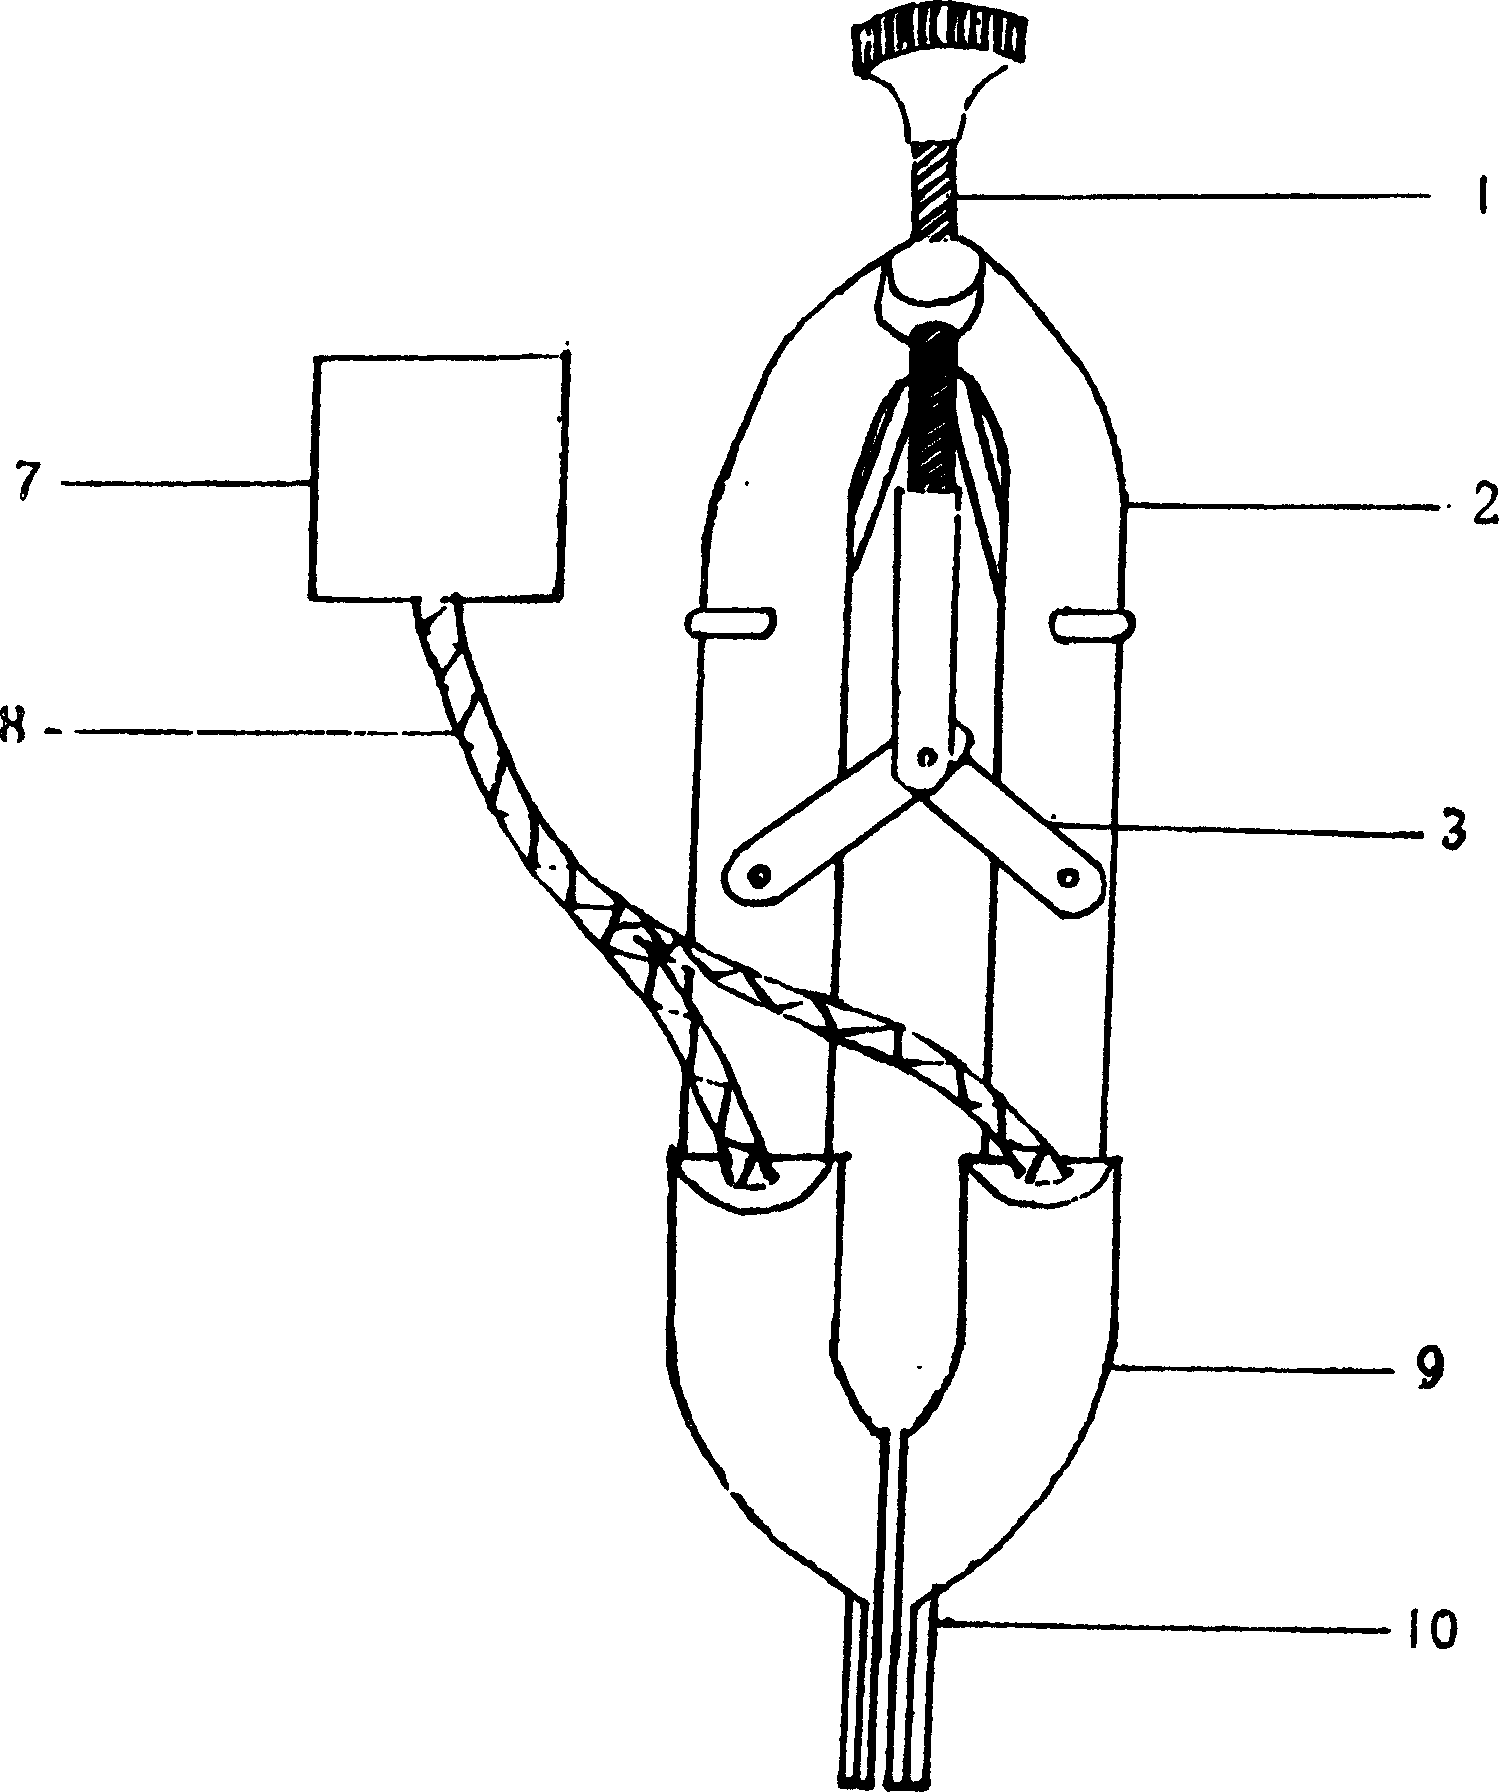 Lacrimal retractor with lighting device